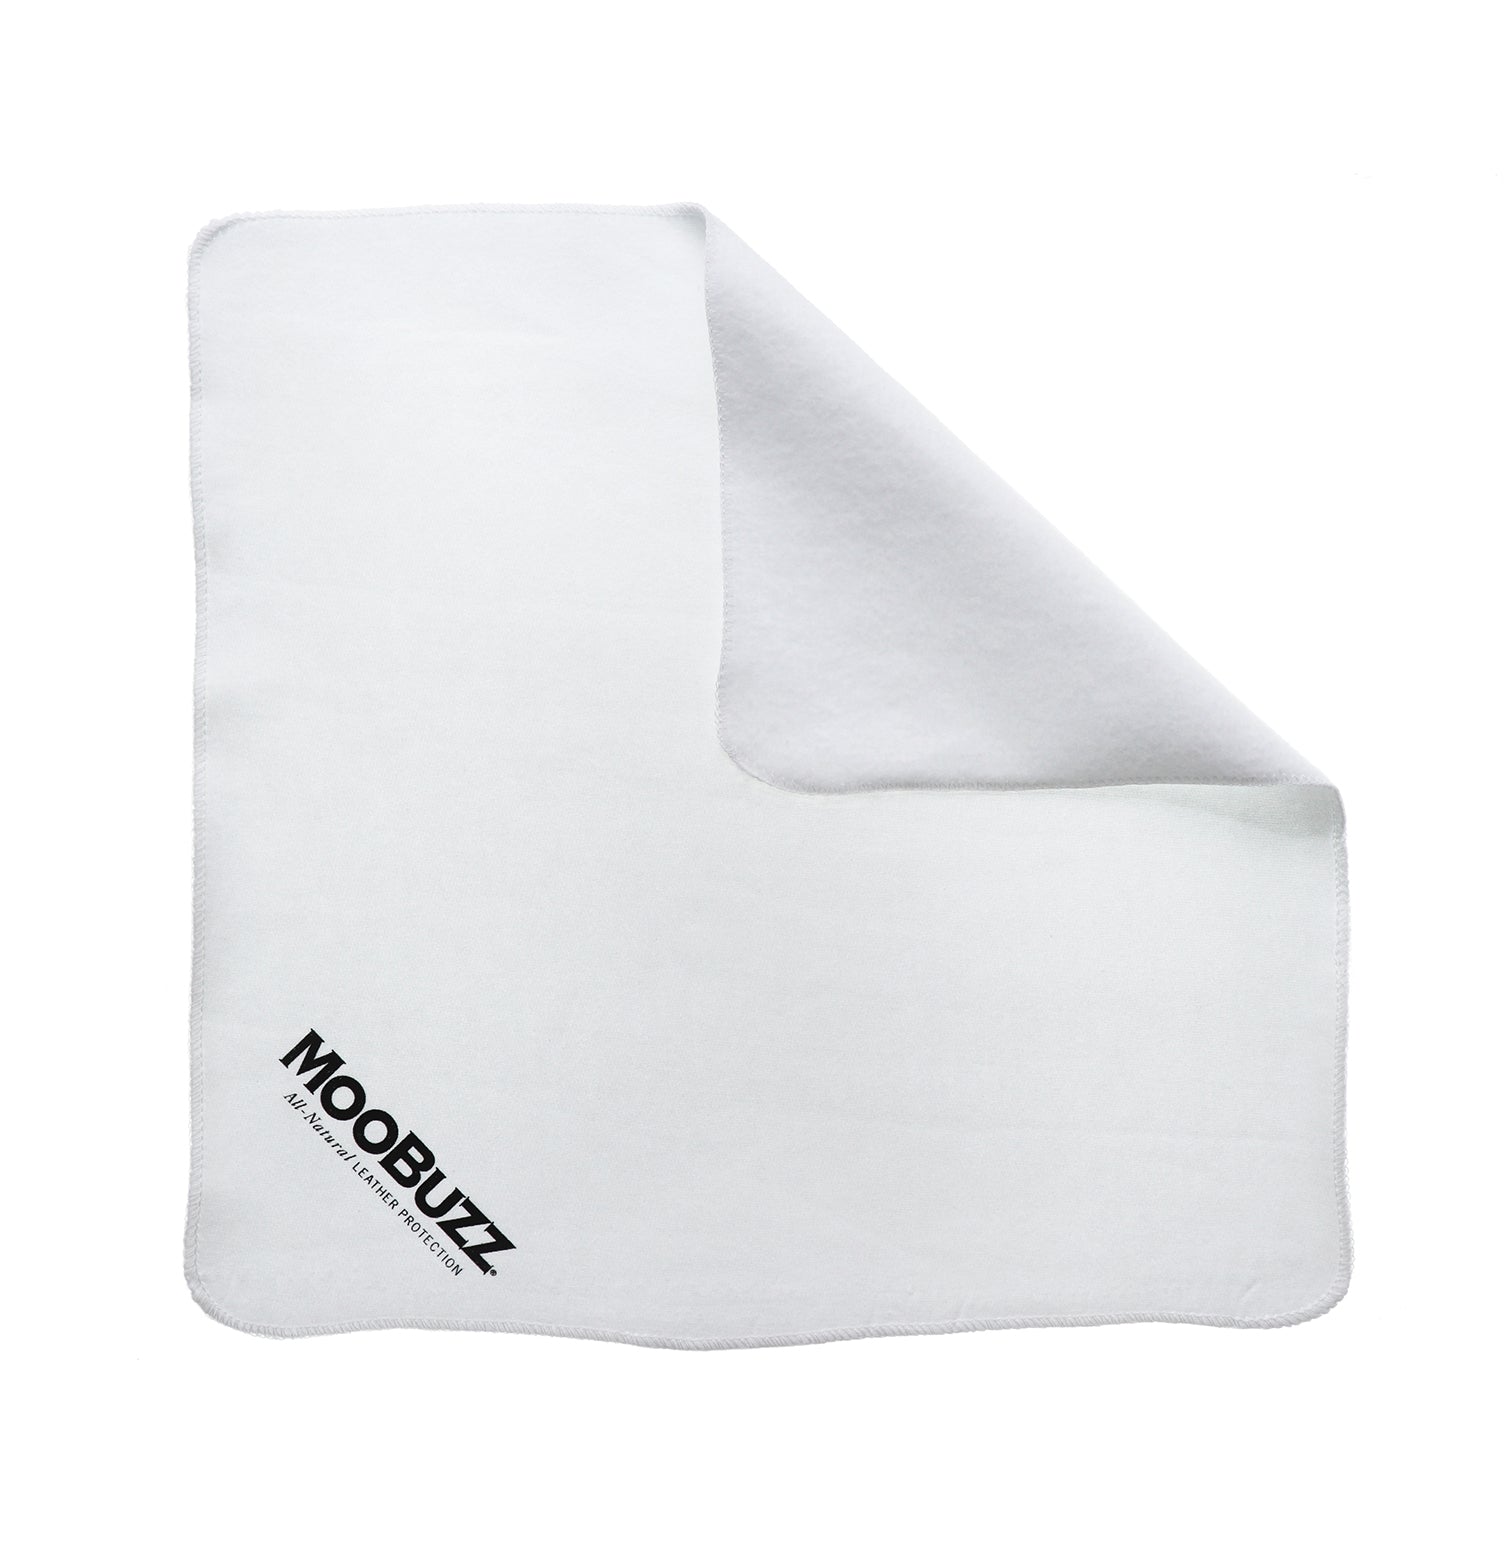 White cotton shoe shine cloth laid out flat with top right corner folded over to show two-sided fabric with smooth side and fuzzy side.